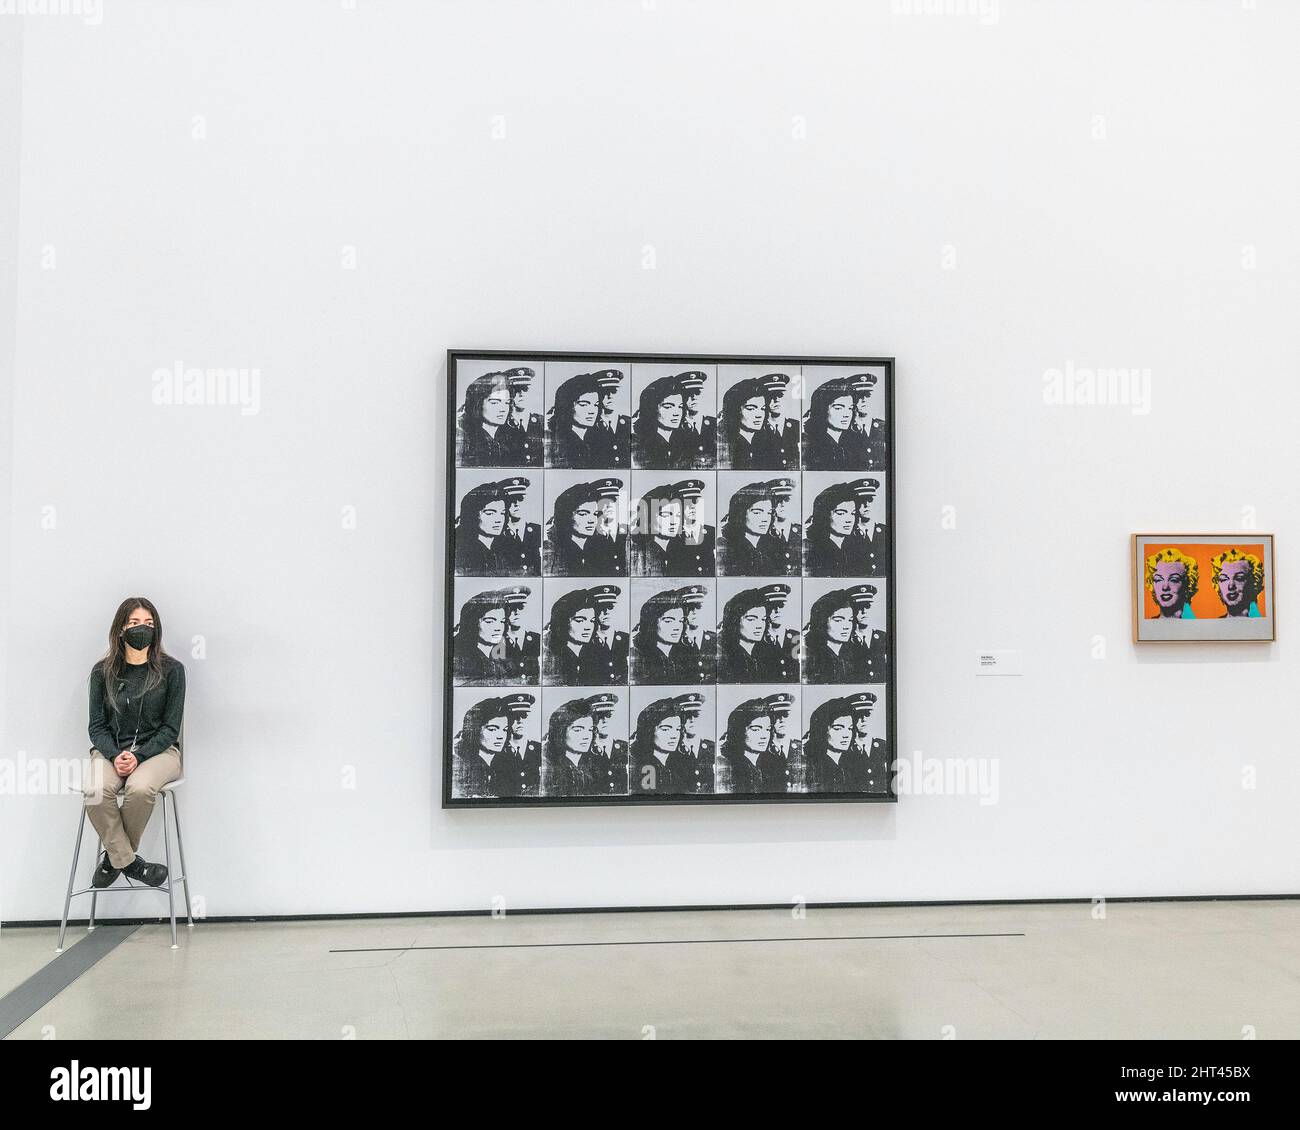 Los Angeles, CA, USA - February 25, 2022: Andy Warhol exhibit at the Broad Museum in downtown Los Angeles, CA. Stock Photo